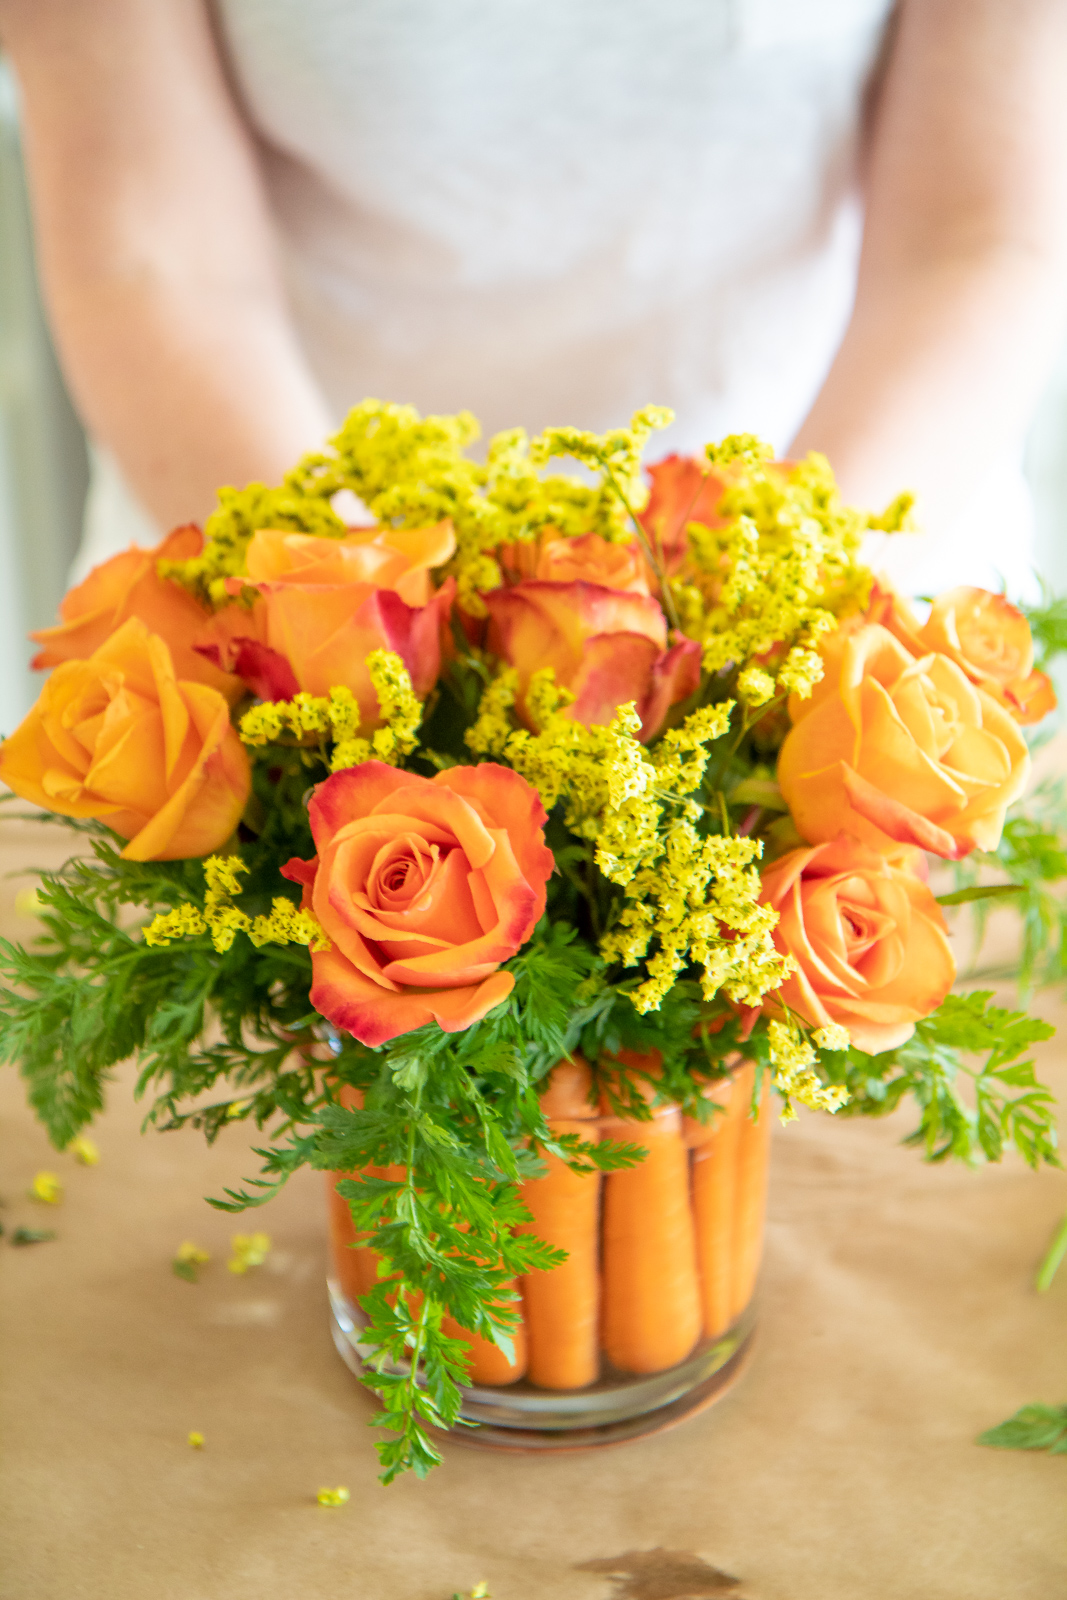 How to use carrots in a flower centerpiece